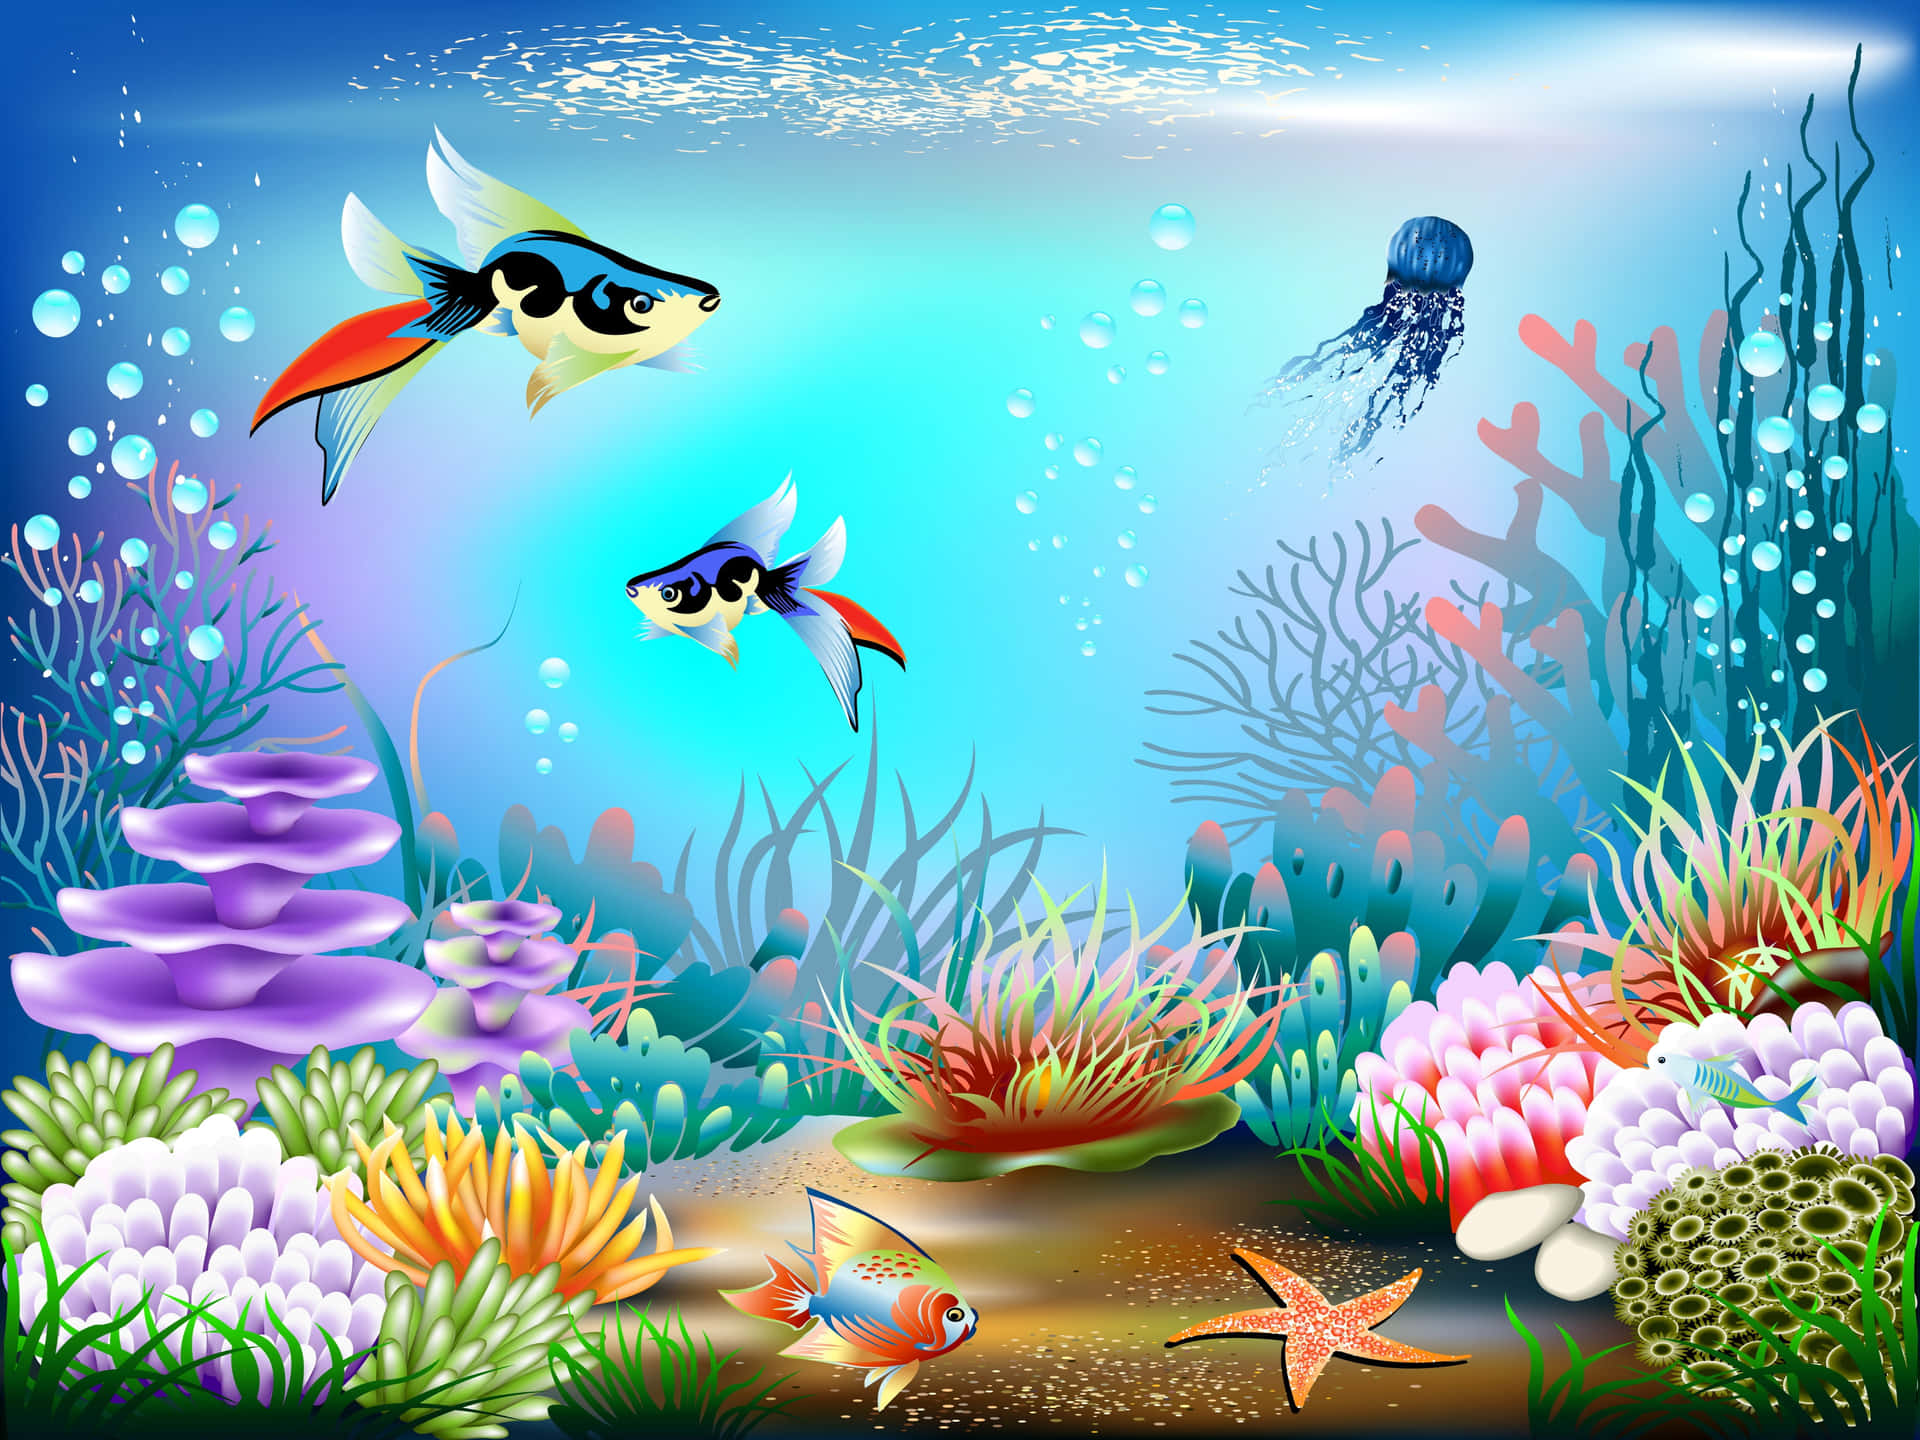 A colorful aquarium filled with vibrant fish